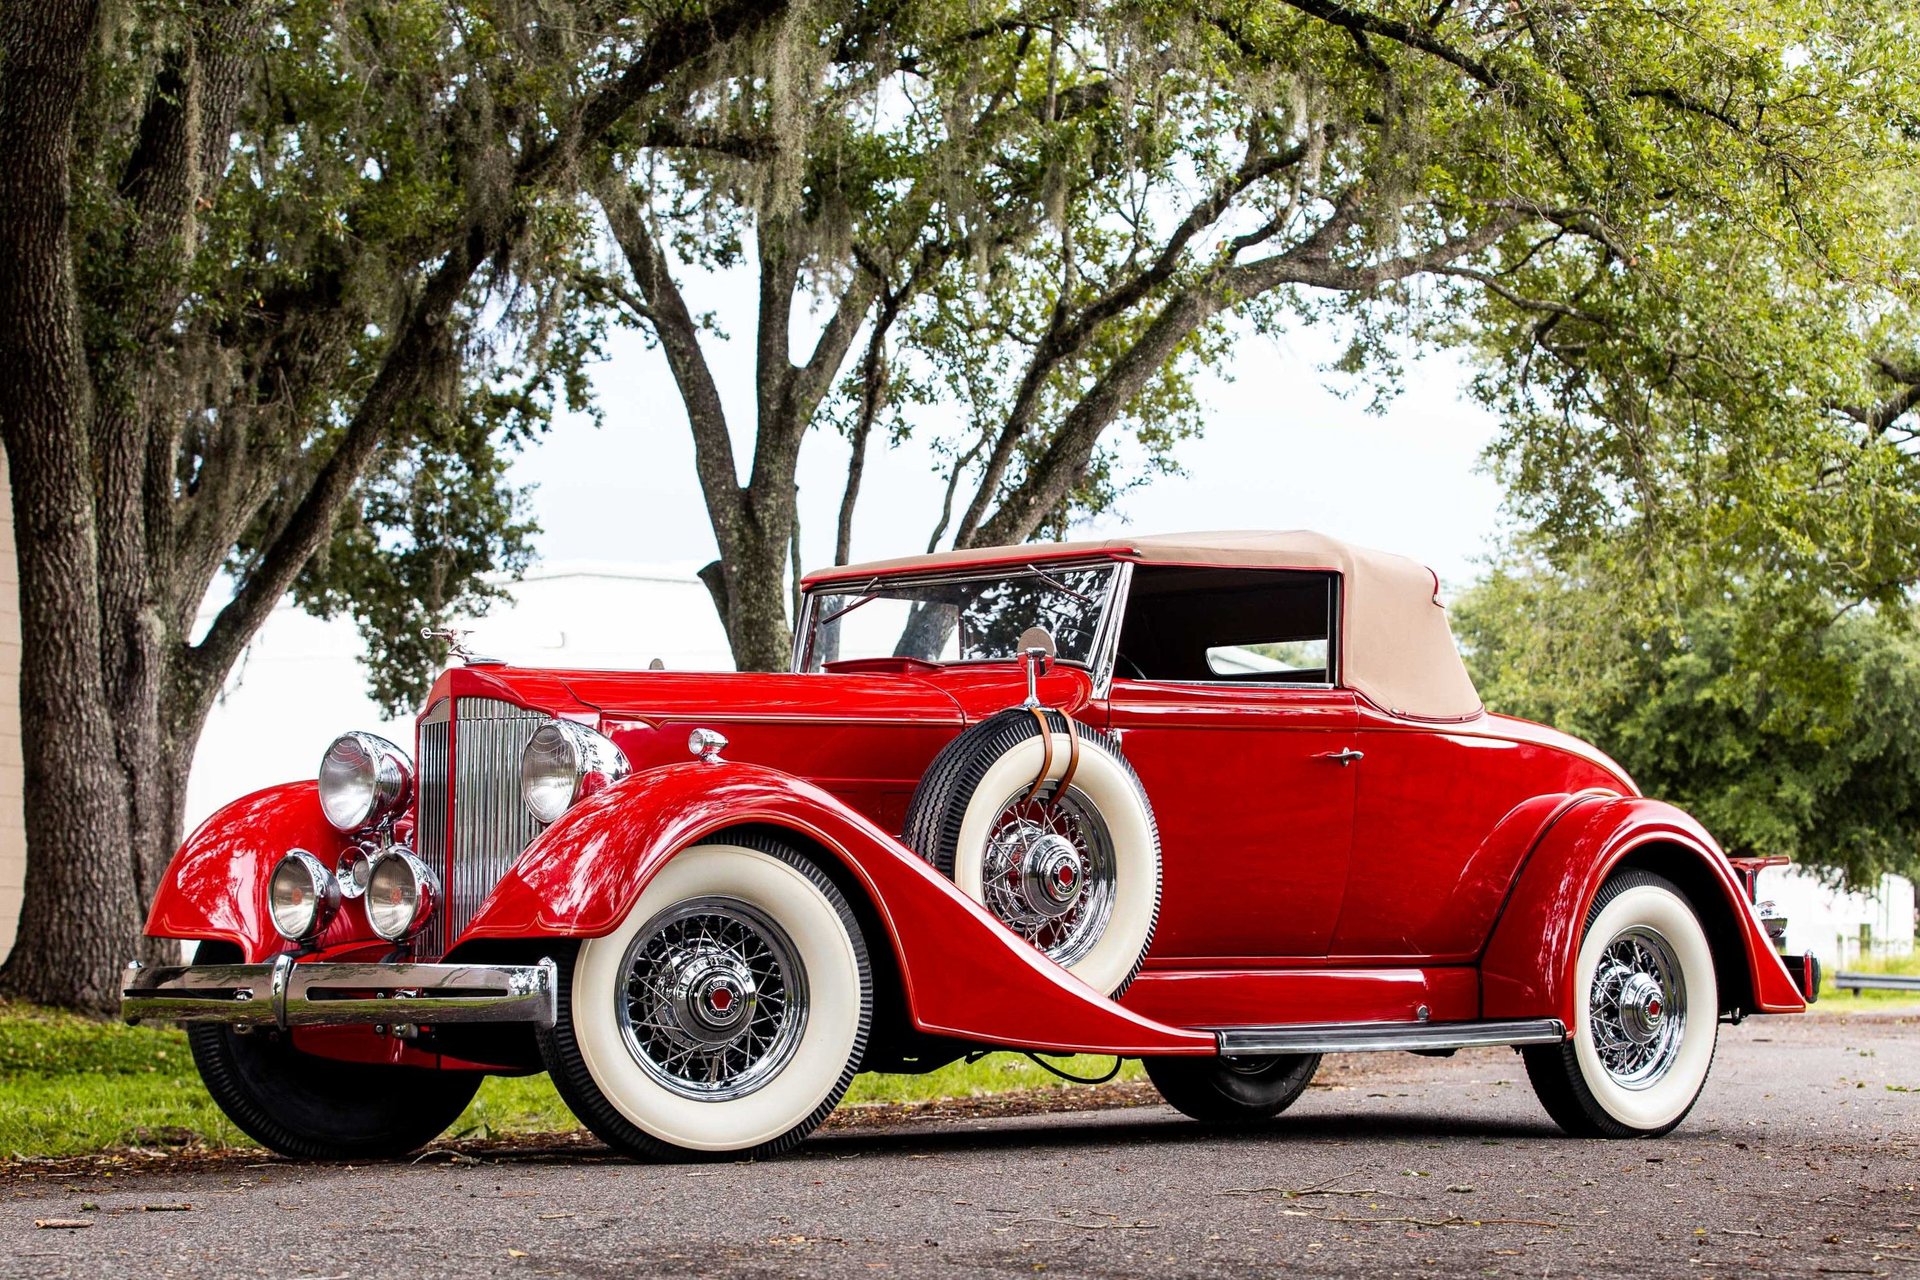 1934 Packard Coupe Roadster | Orlando Classic Cars